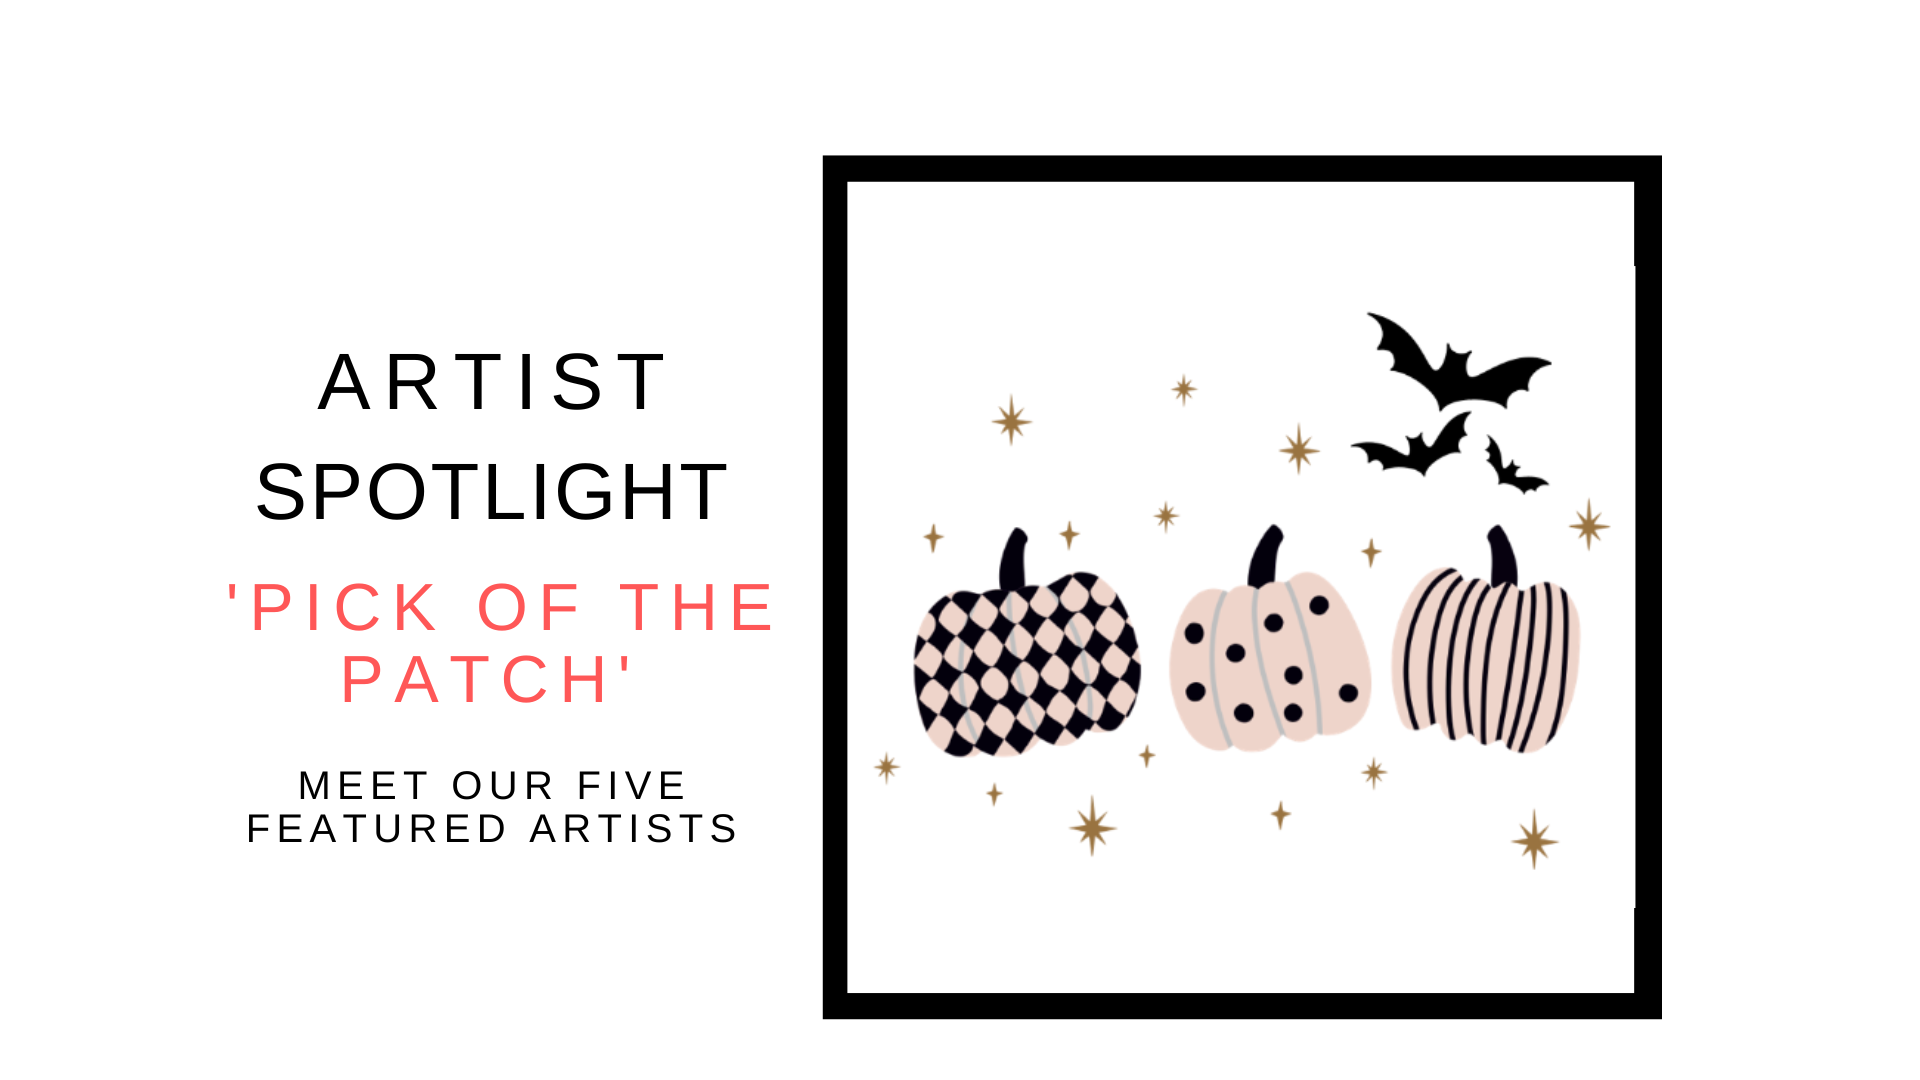 WKP Artist Spotlight: The Pick of the Patch